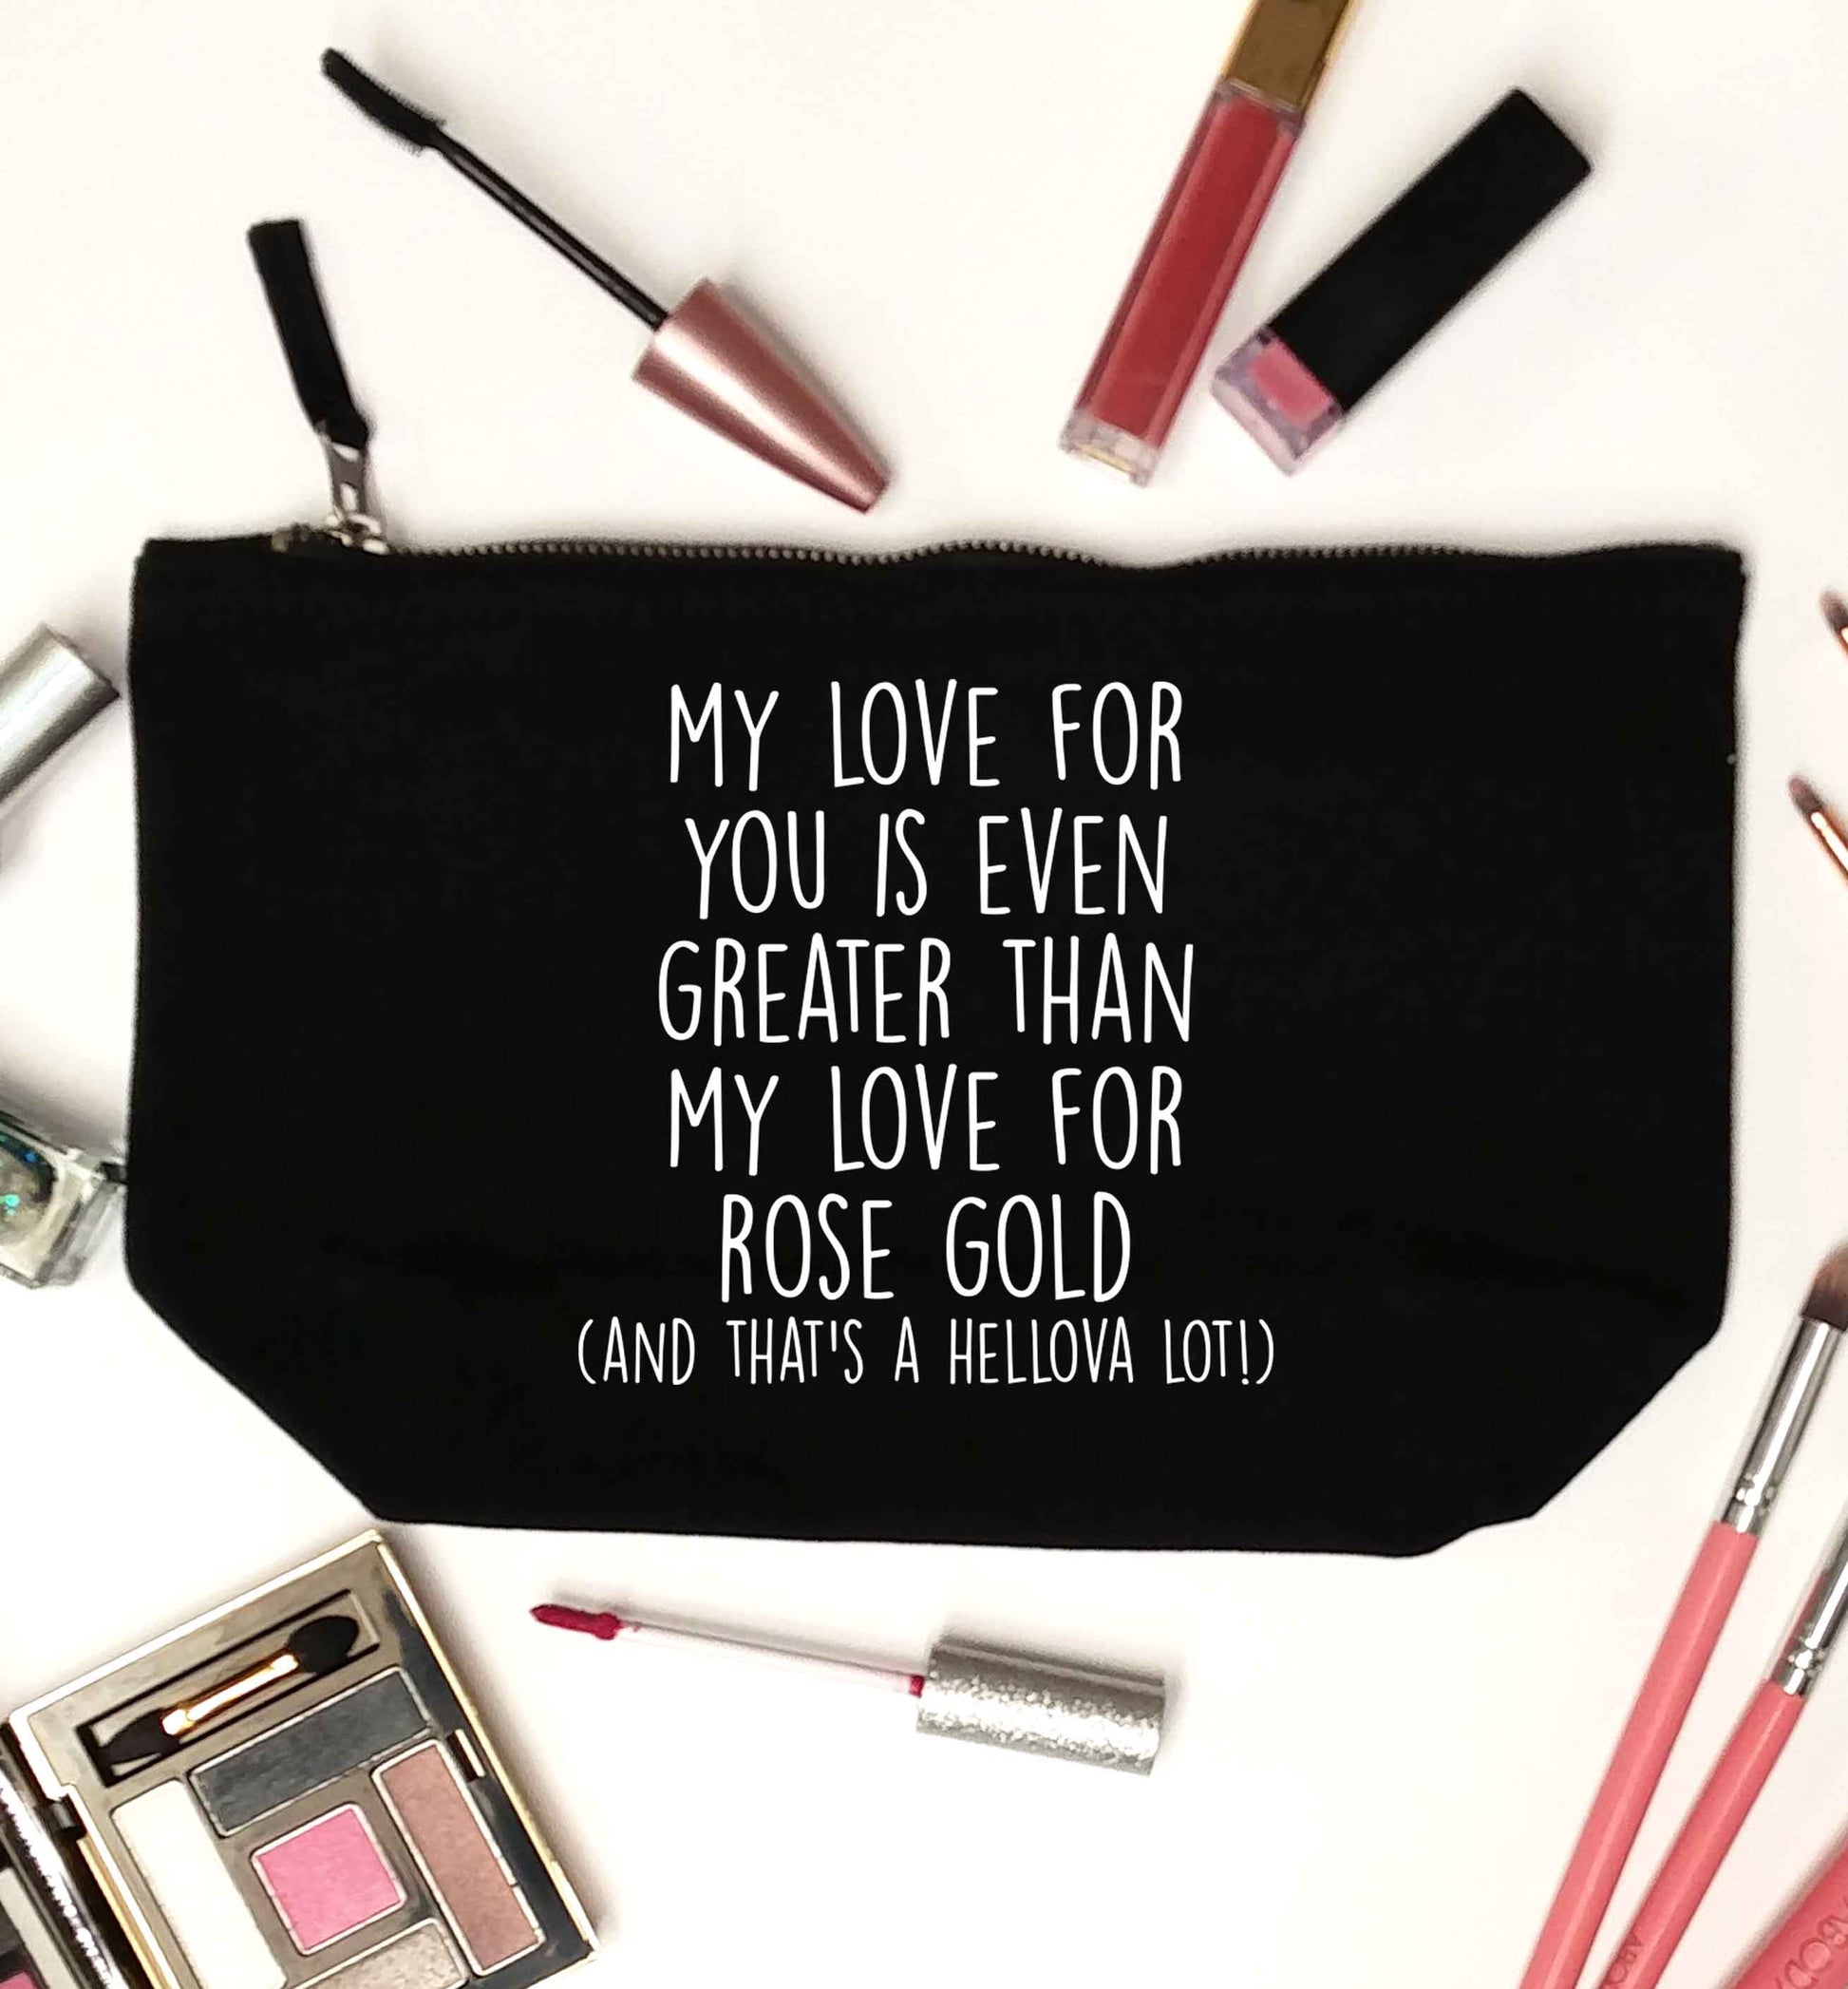 My love for you is even greater than my love for rose gold (and that's a hellova lot) black makeup bag